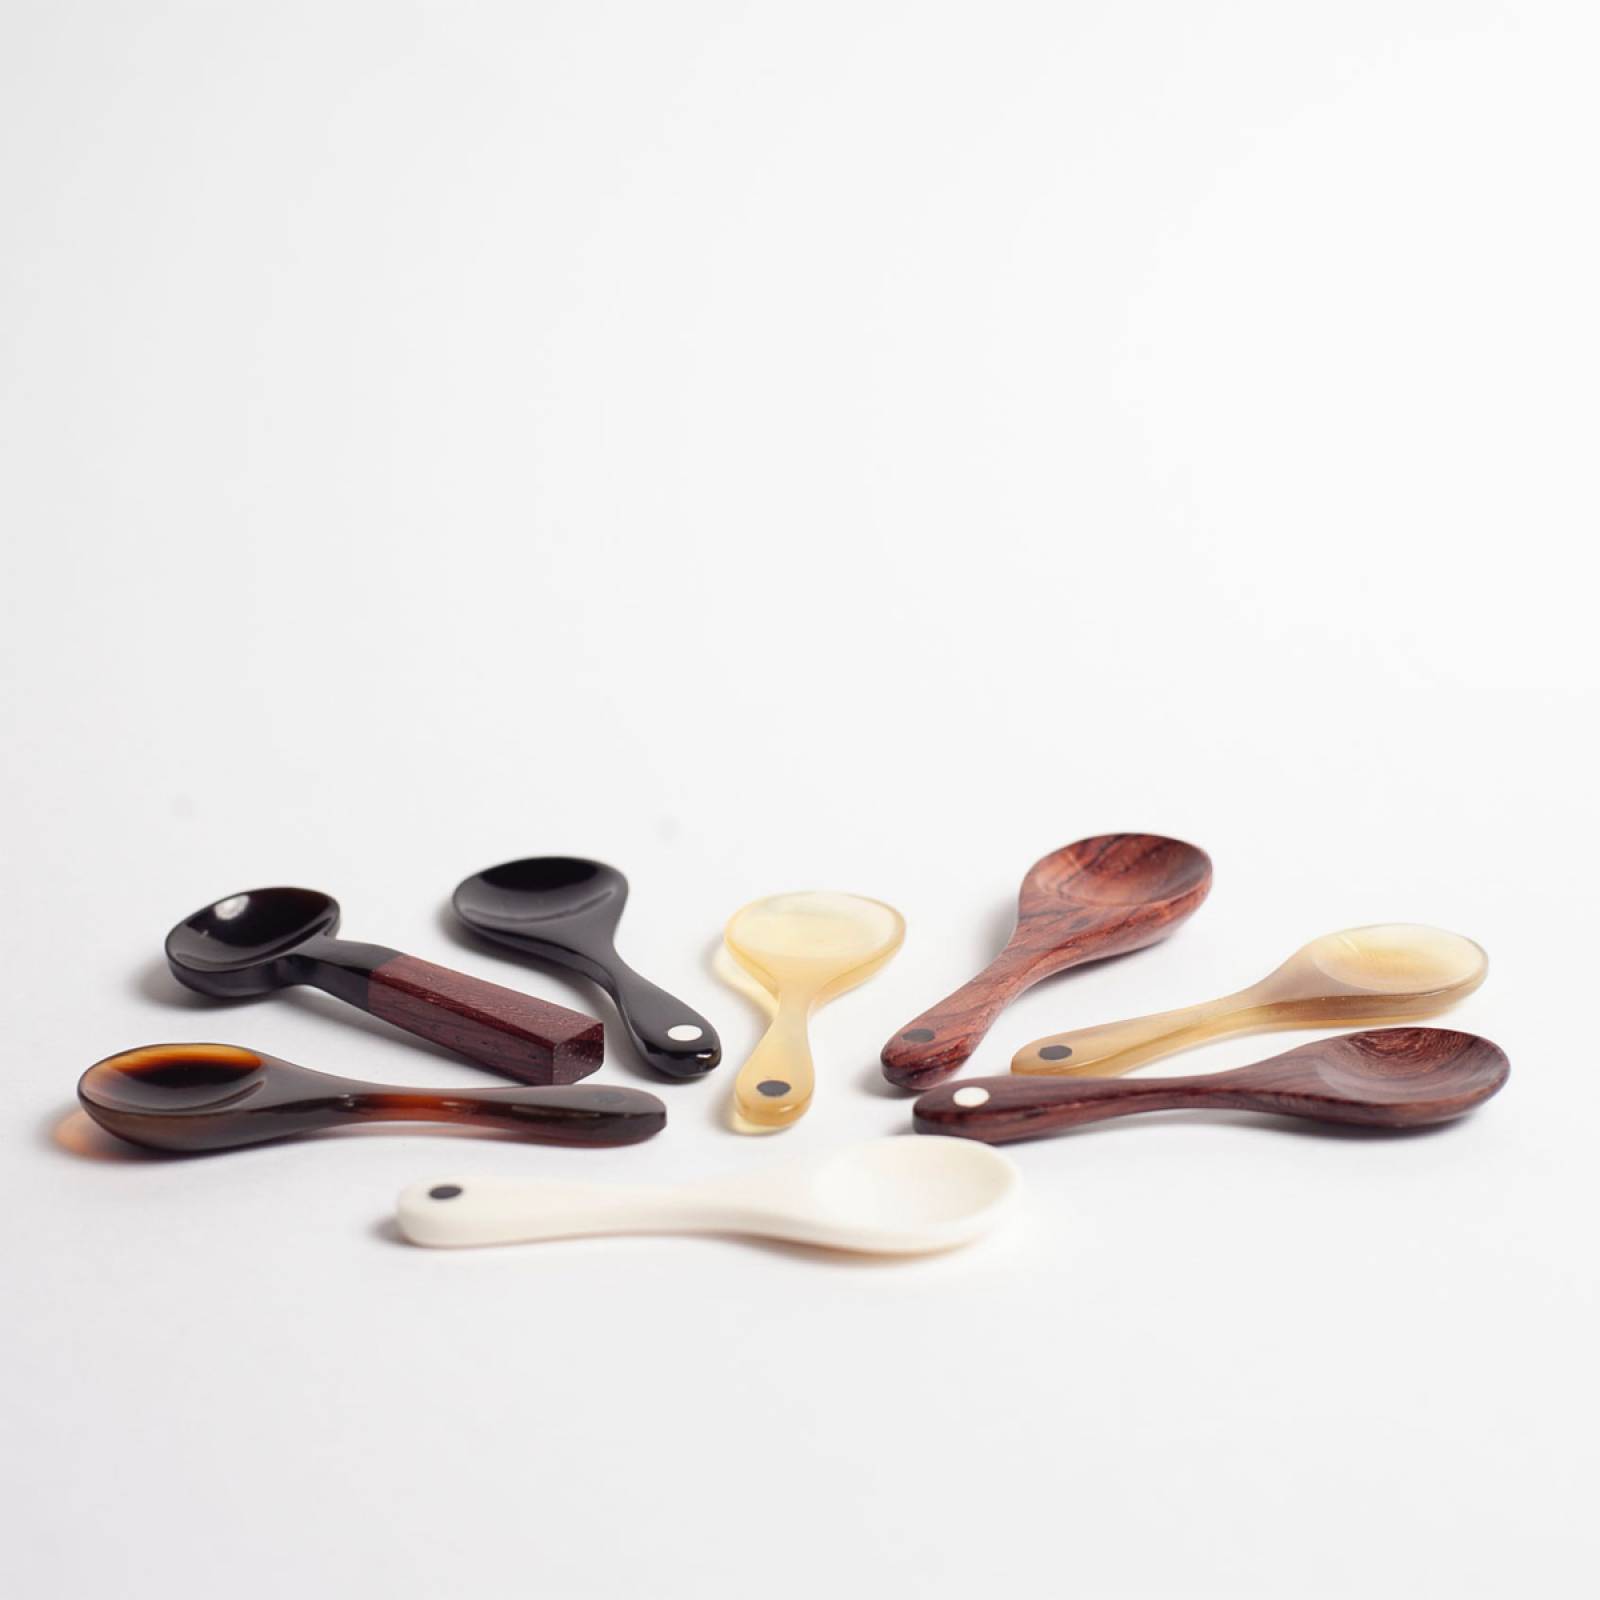 Salt & Pepper Spoon - Rosewood With White Dot thumbnails